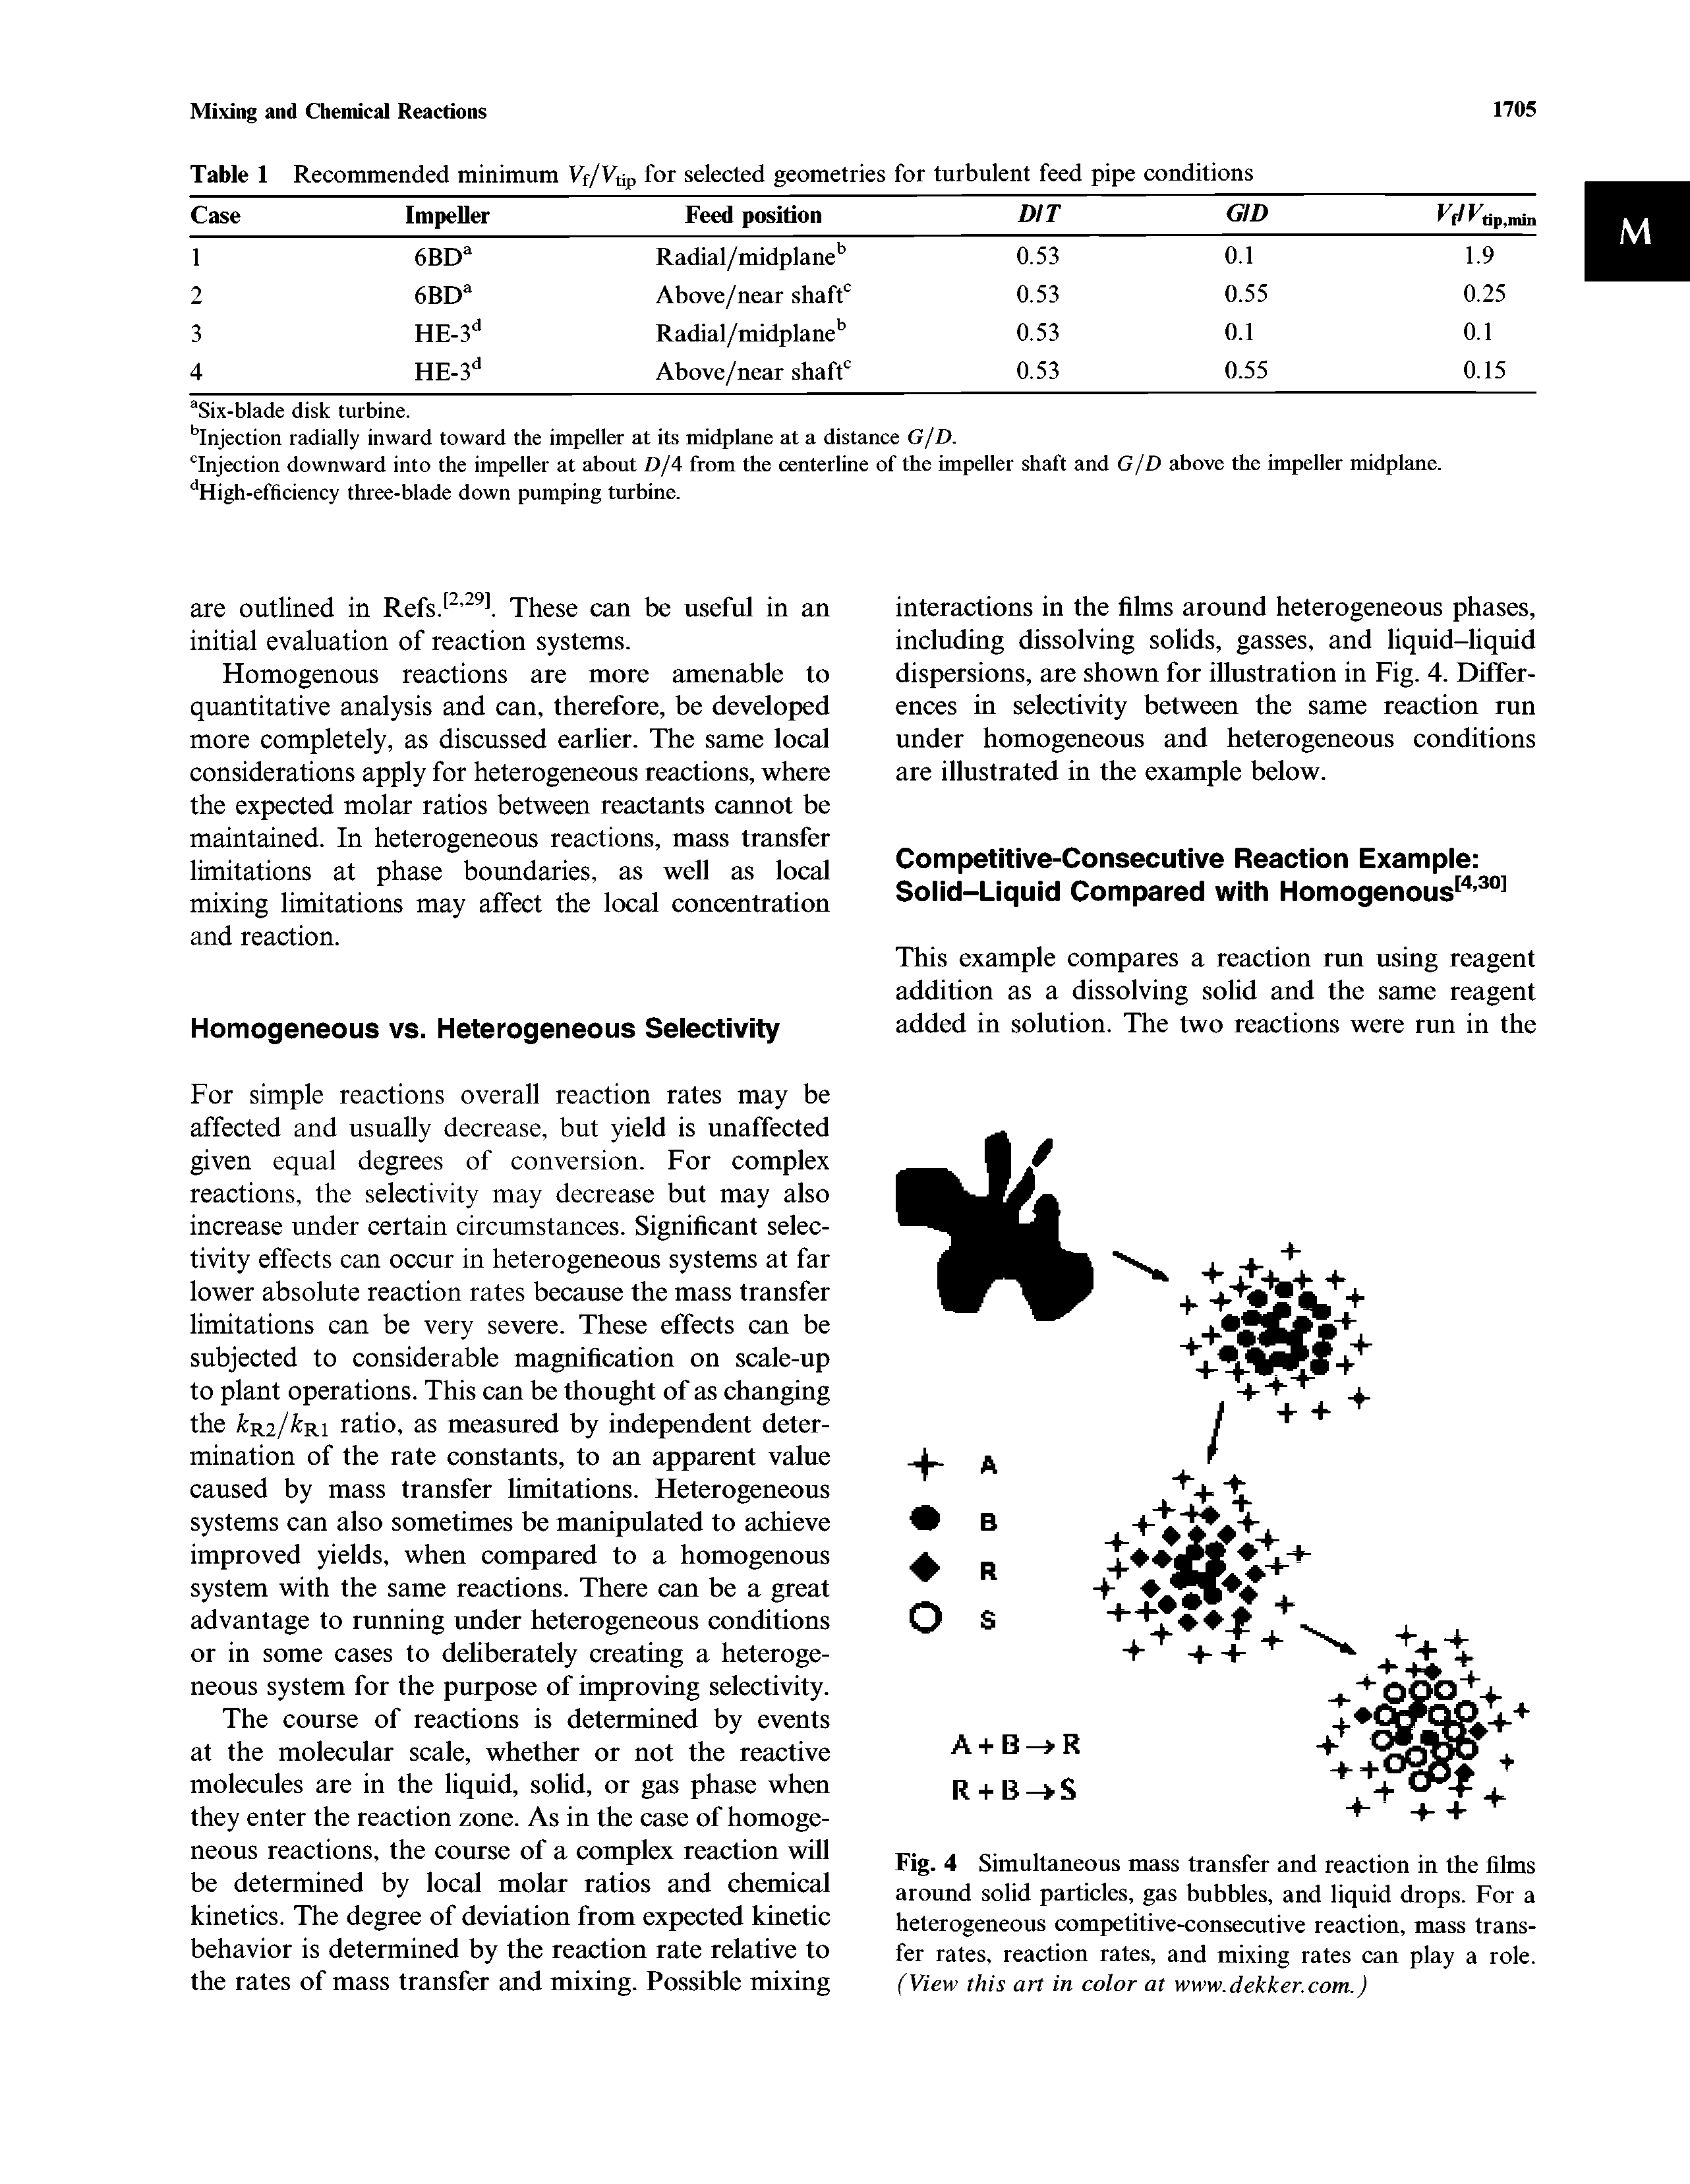 Fig. 4 Simultaneous mass transfer and reaction in the films around solid particles, gas bubbles, and liquid drops. For a heterogeneous competitive-consecutive reaction, mass transfer rates, reaction rates, and mixing rates can play a role. (View this art in color at www.dekker.com.)...